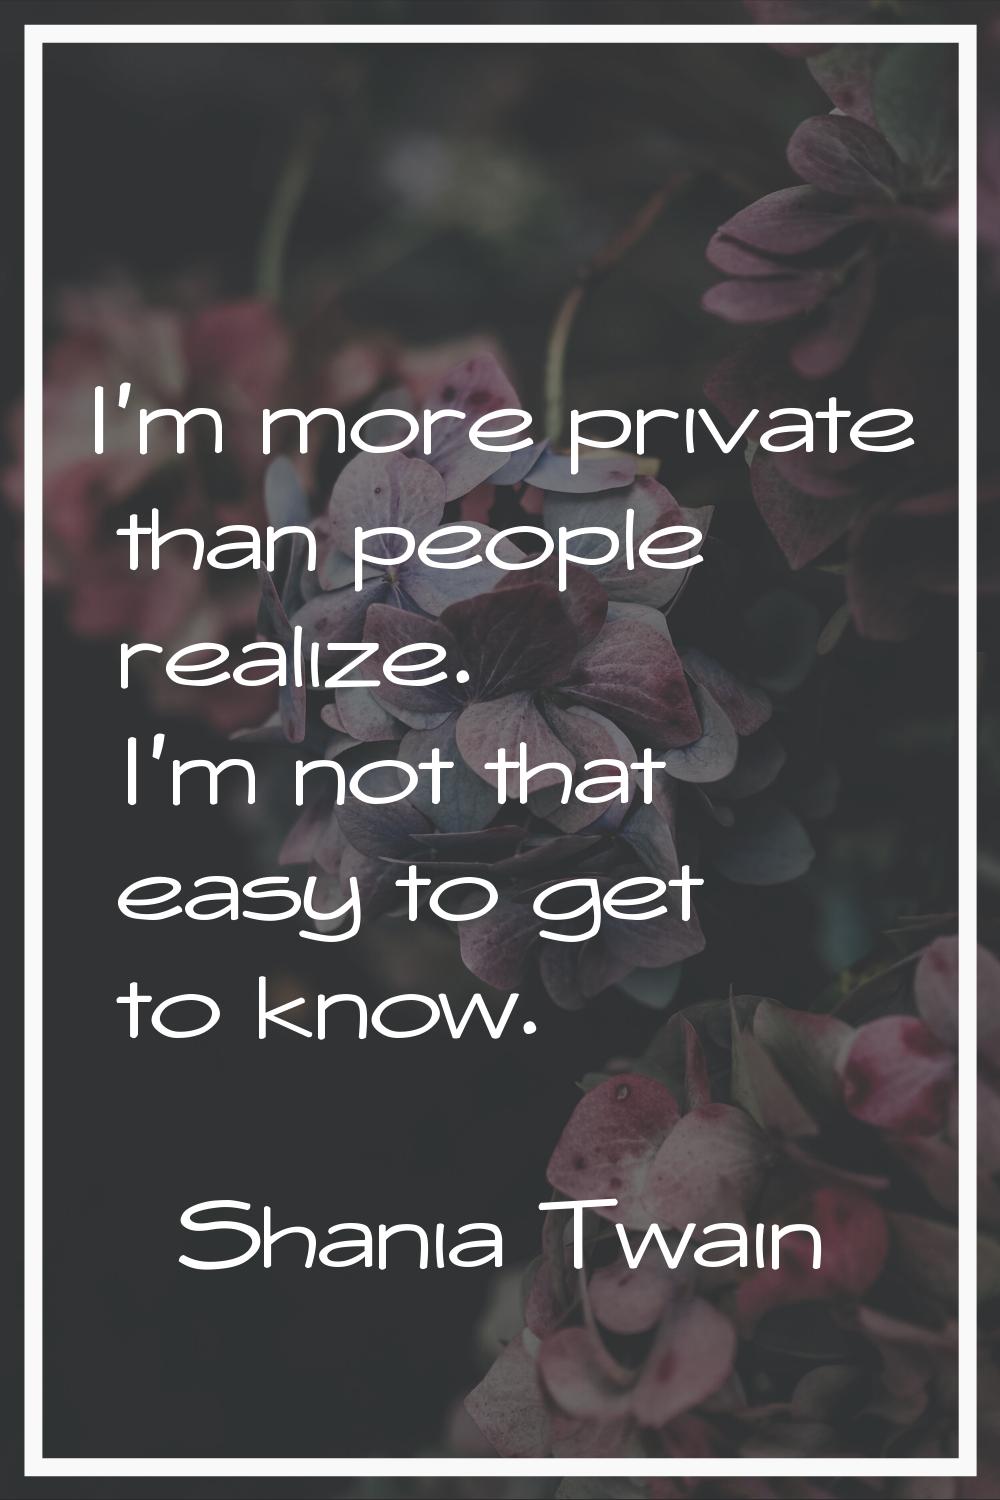 I'm more private than people realize. I'm not that easy to get to know.